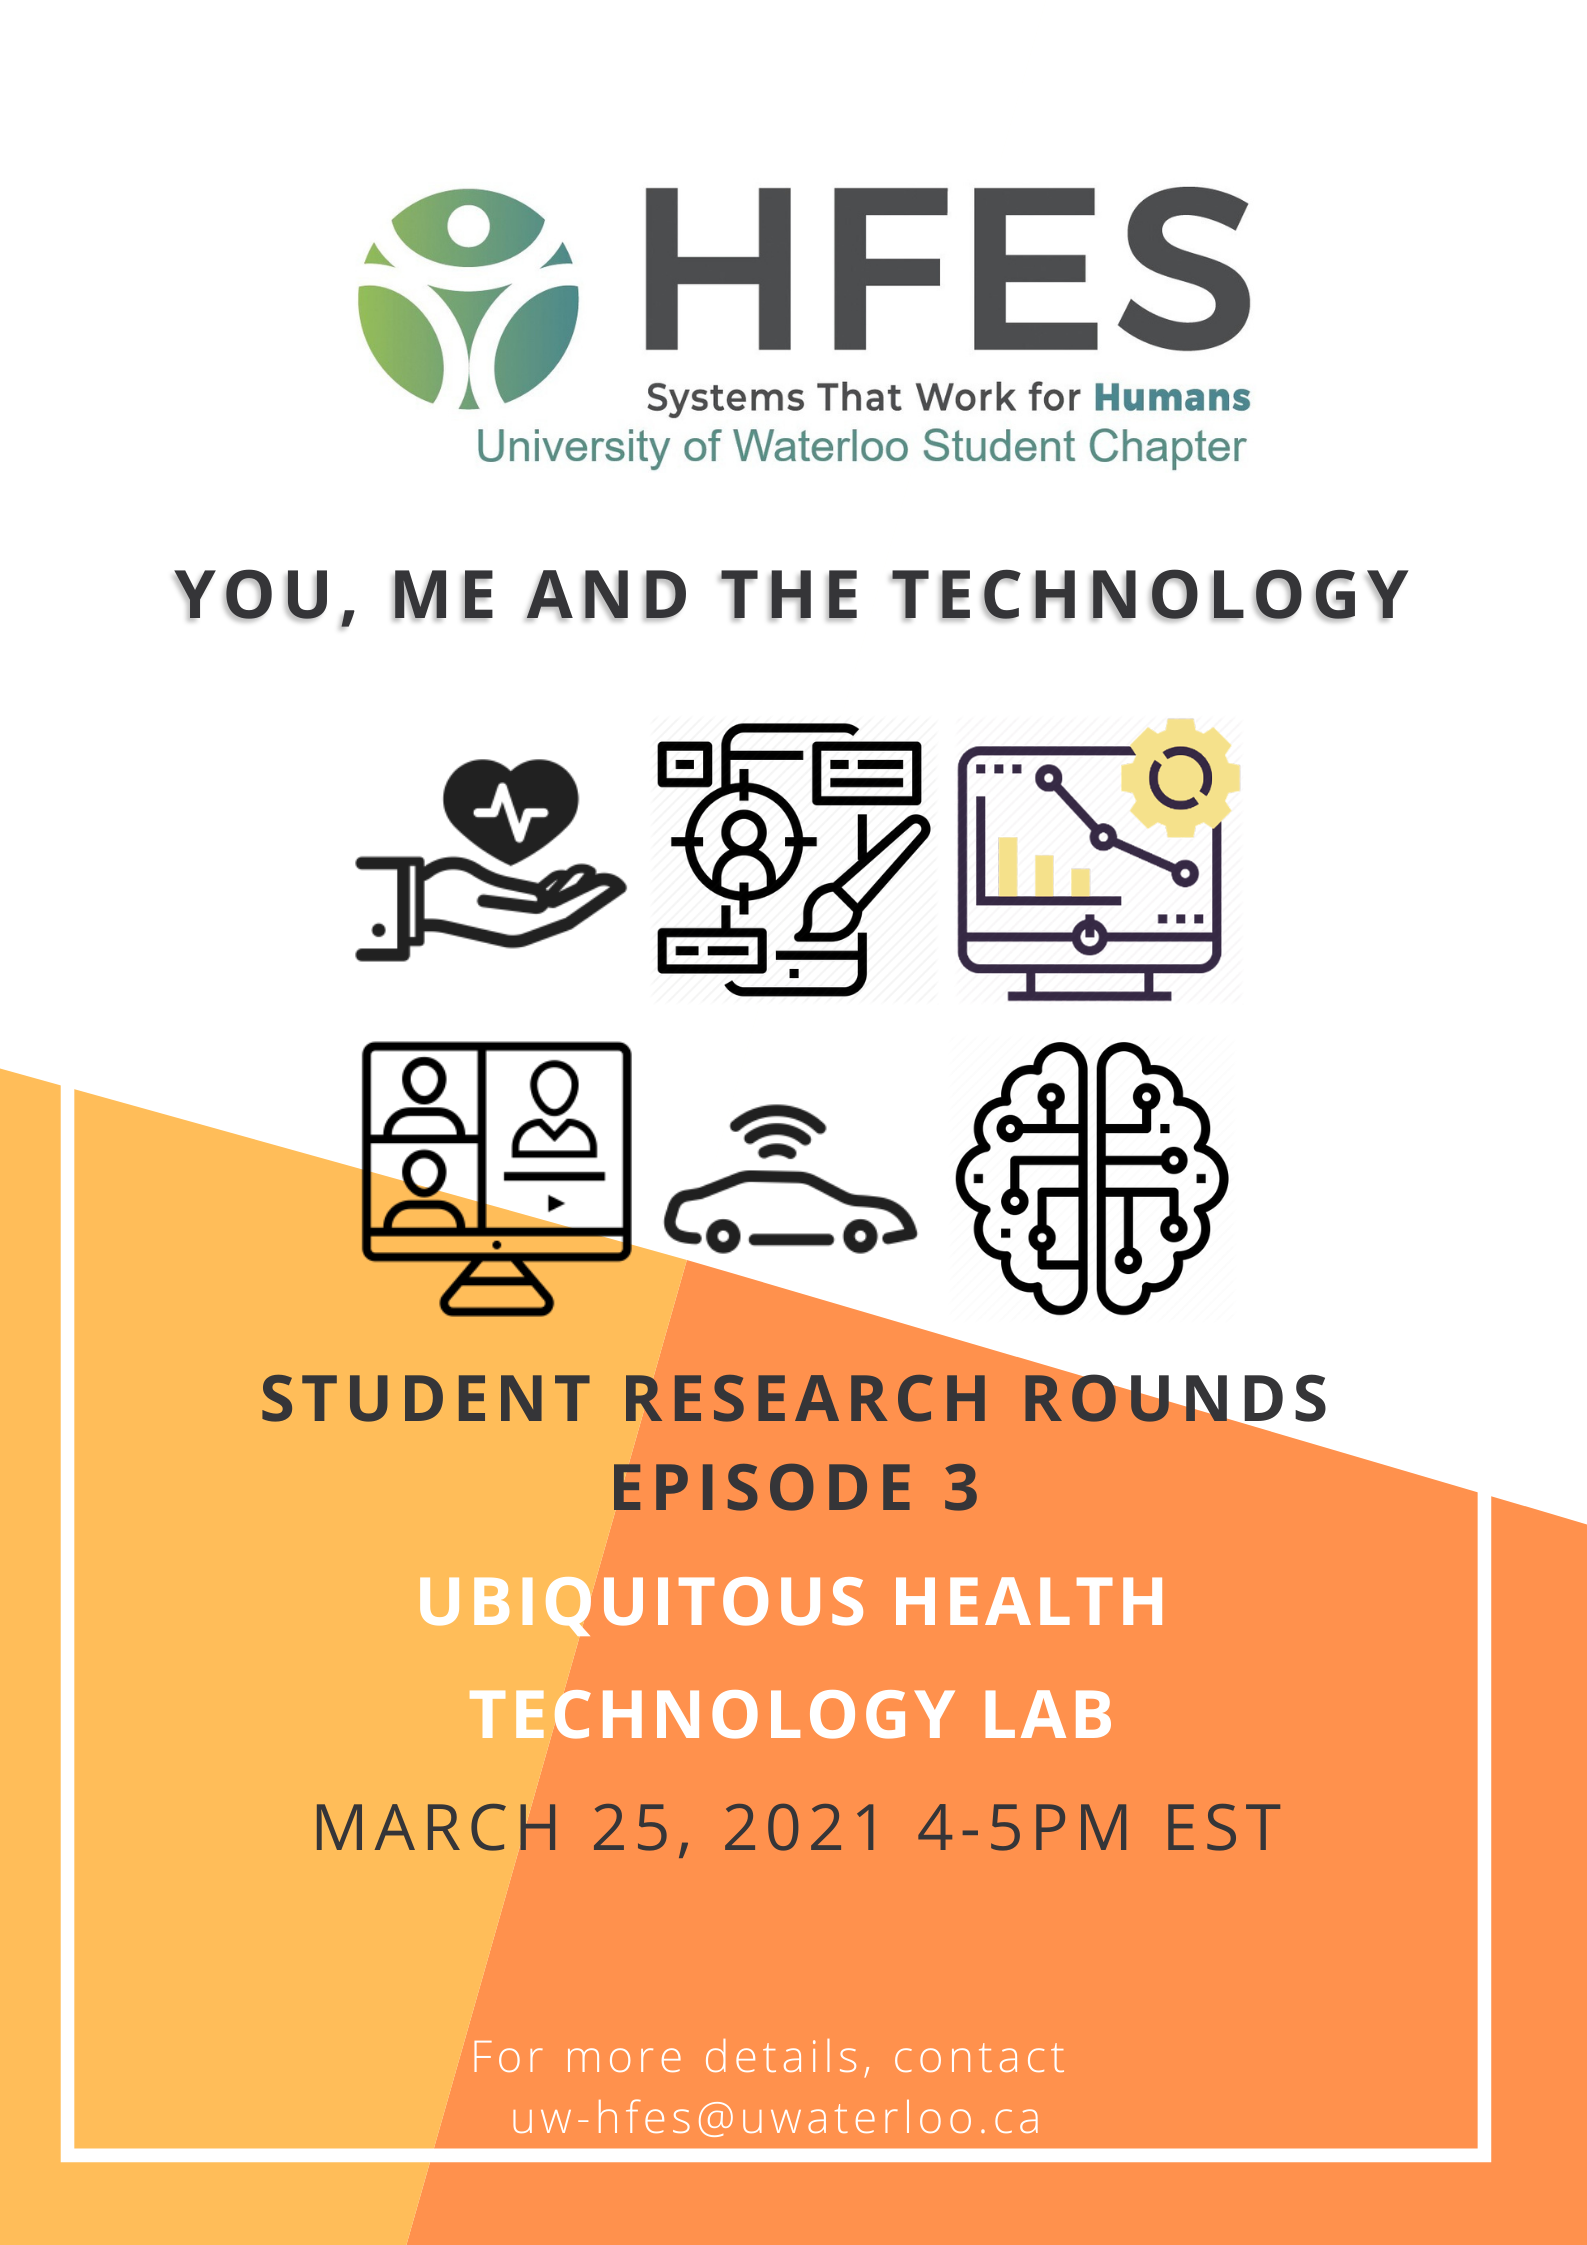 Student Research Rounds - Episode 3 featuring  Ubiquitous Health Technology Lab